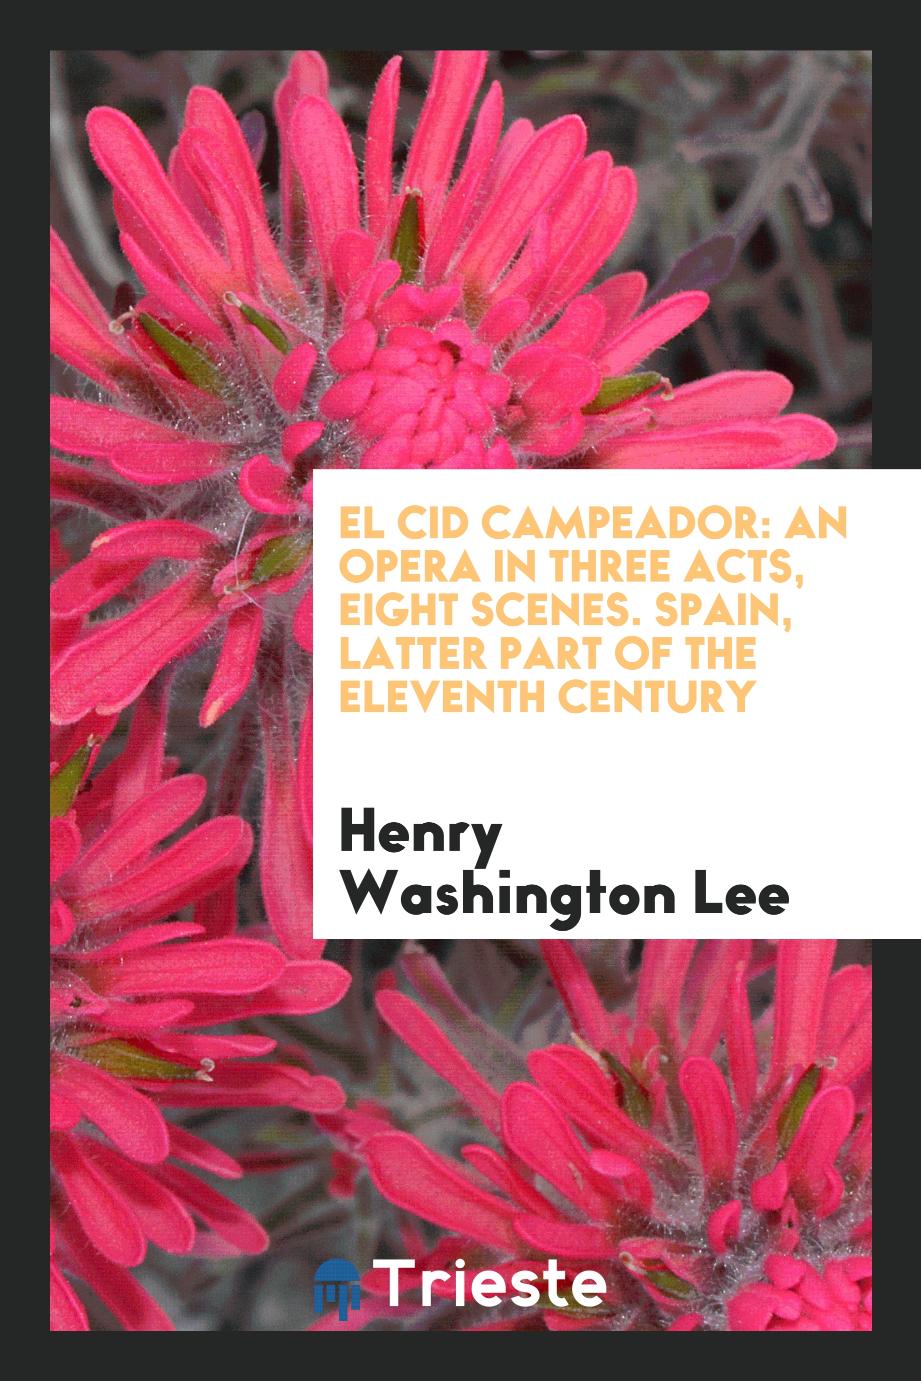 El Cid Campeador: An Opera in Three Acts, Eight Scenes. Spain, Latter Part of the Eleventh Century